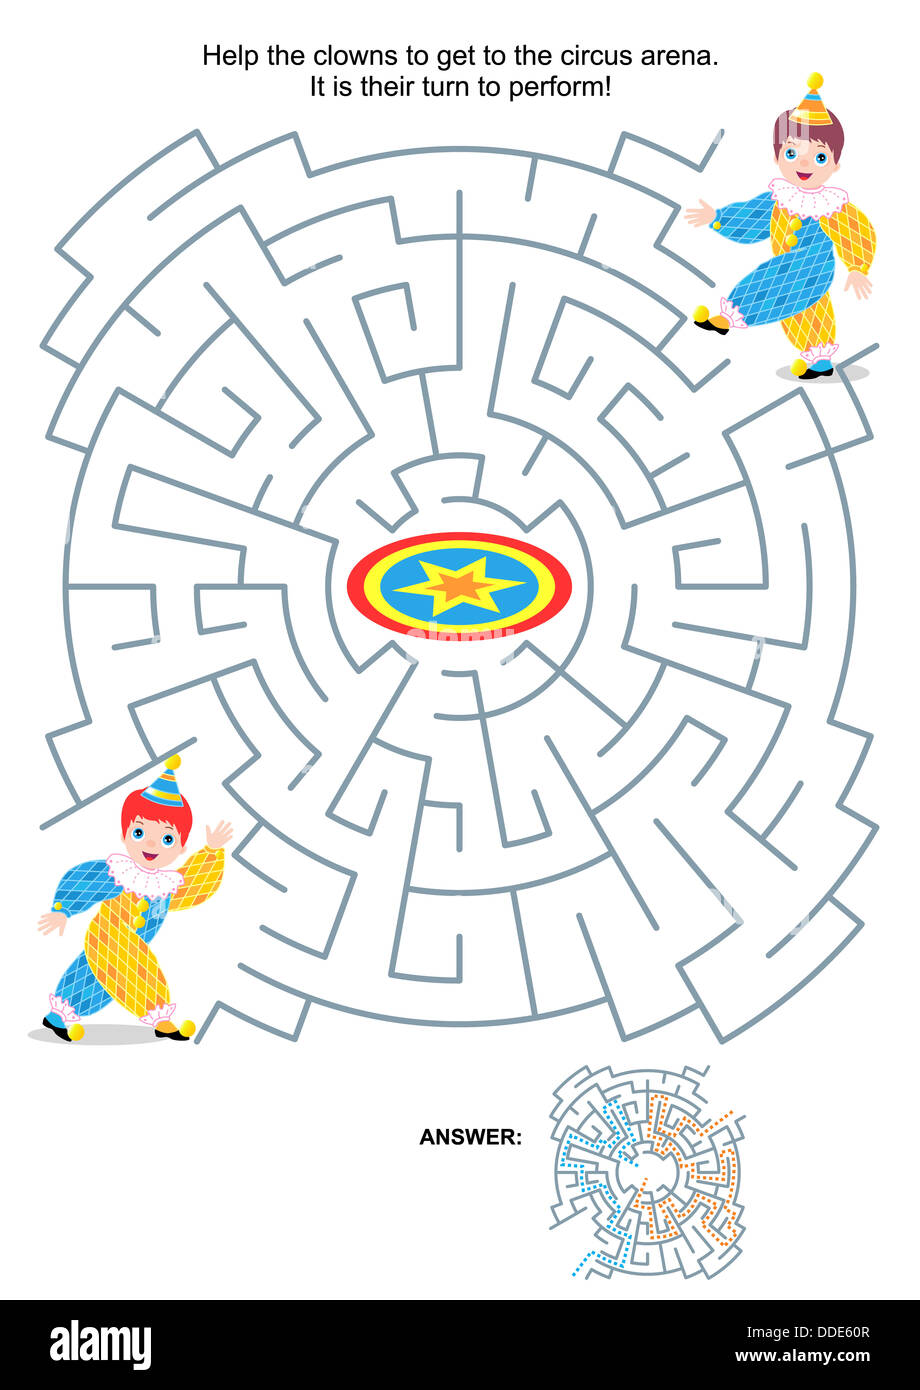 Maze game or activity page for kids: Help the clowns to get to the circus arena. It is their turn to perform! Answer included. Stock Photo